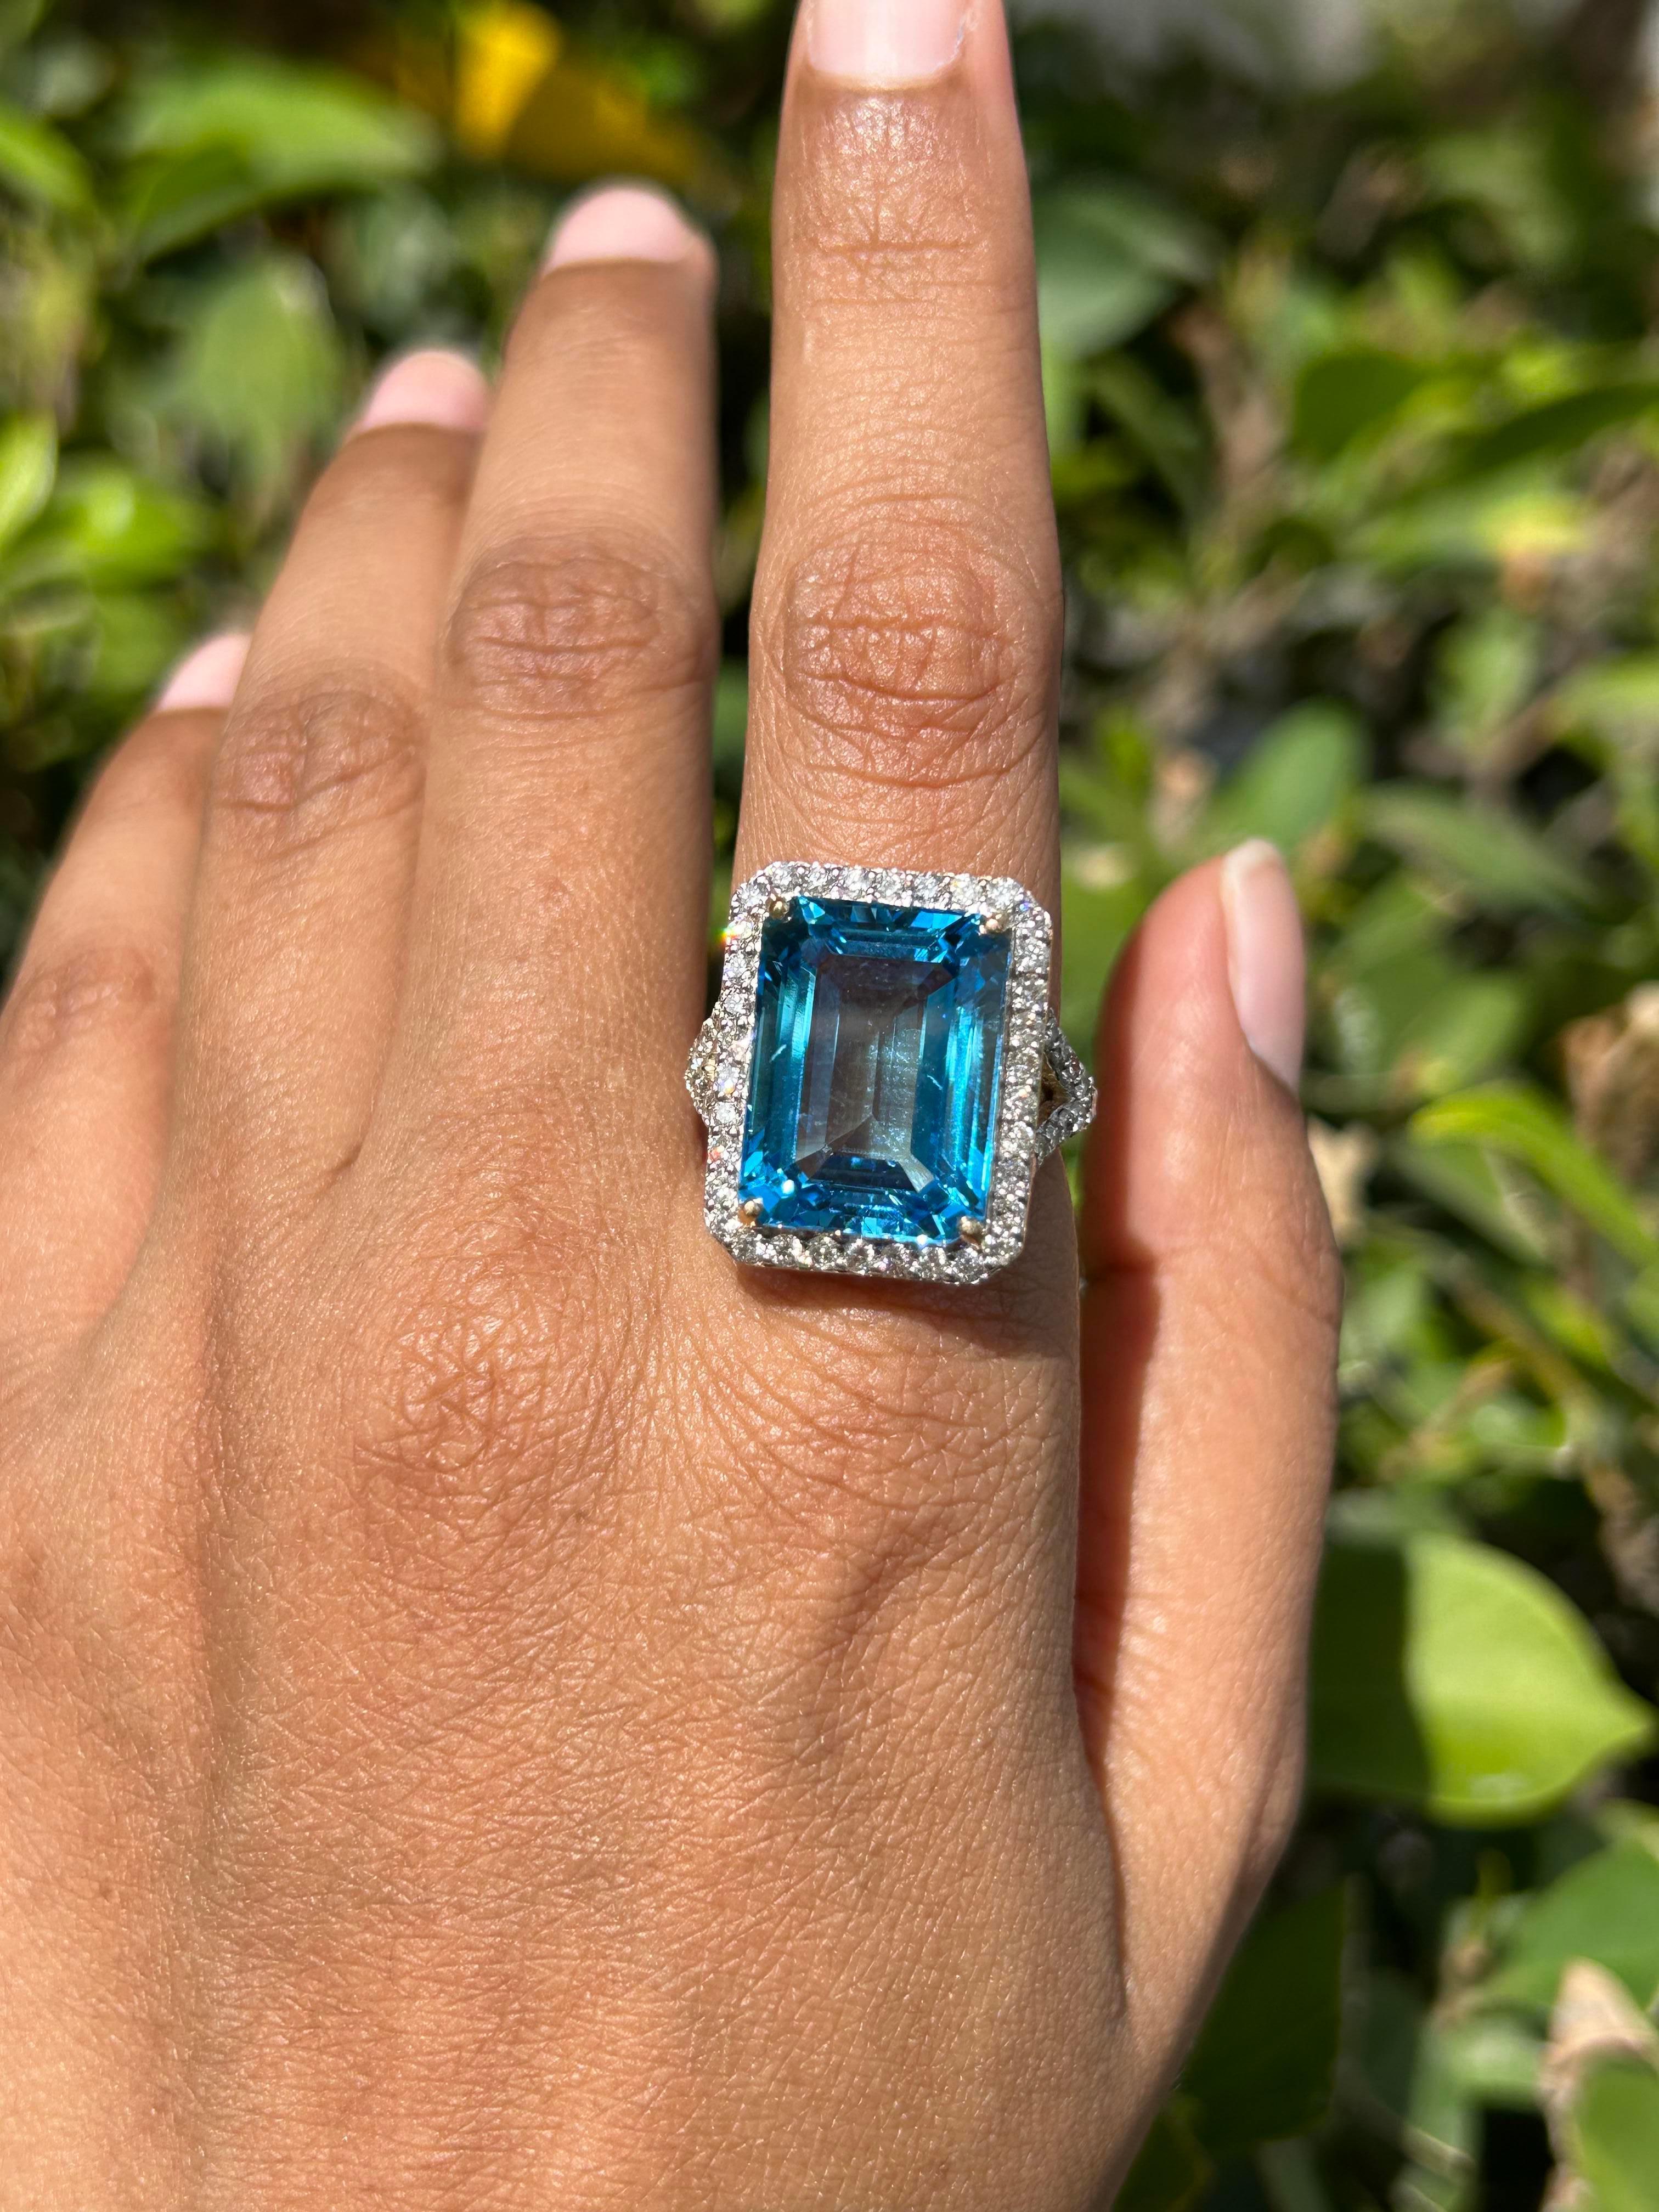 For Sale:  14k Solid Yellow Gold Large 15.41 CTW Blue Topaz Halo Diamond Cocktail Ring 9